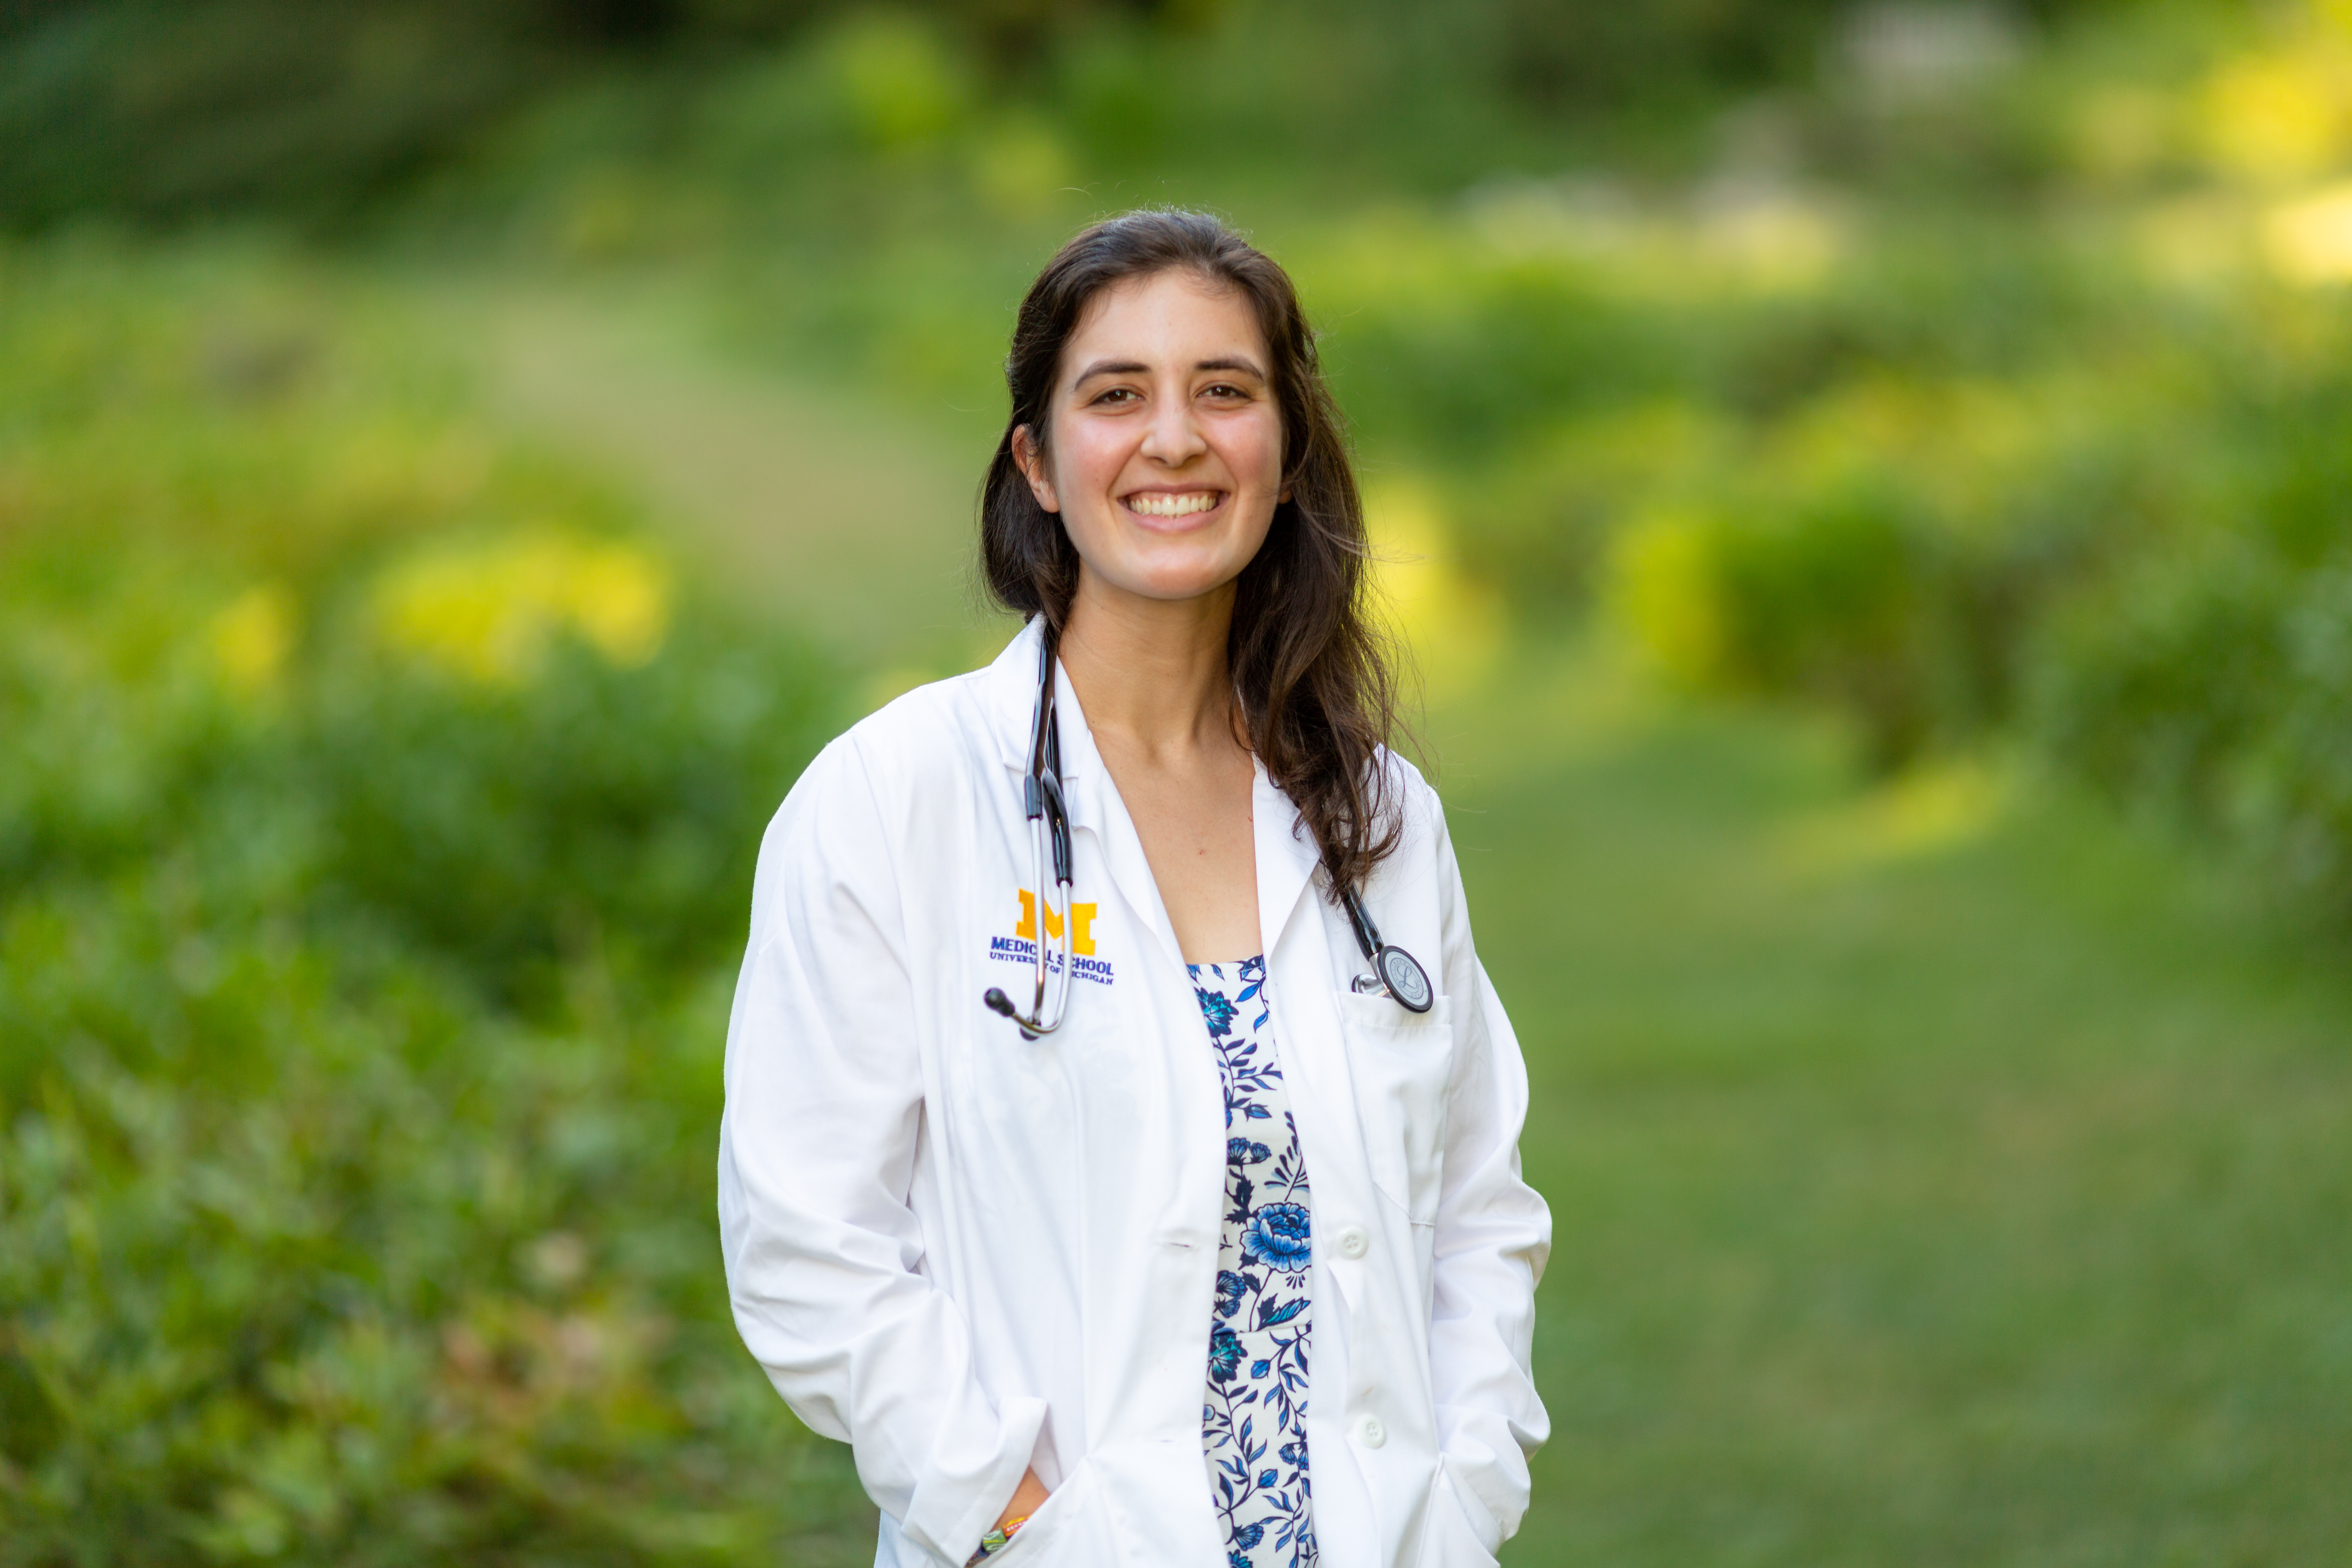 Kate is a white female with dark hair, she is wearing a blue flower print dress, white lab coat and a stethoscope around her neck. The background is a blurred green landscape.